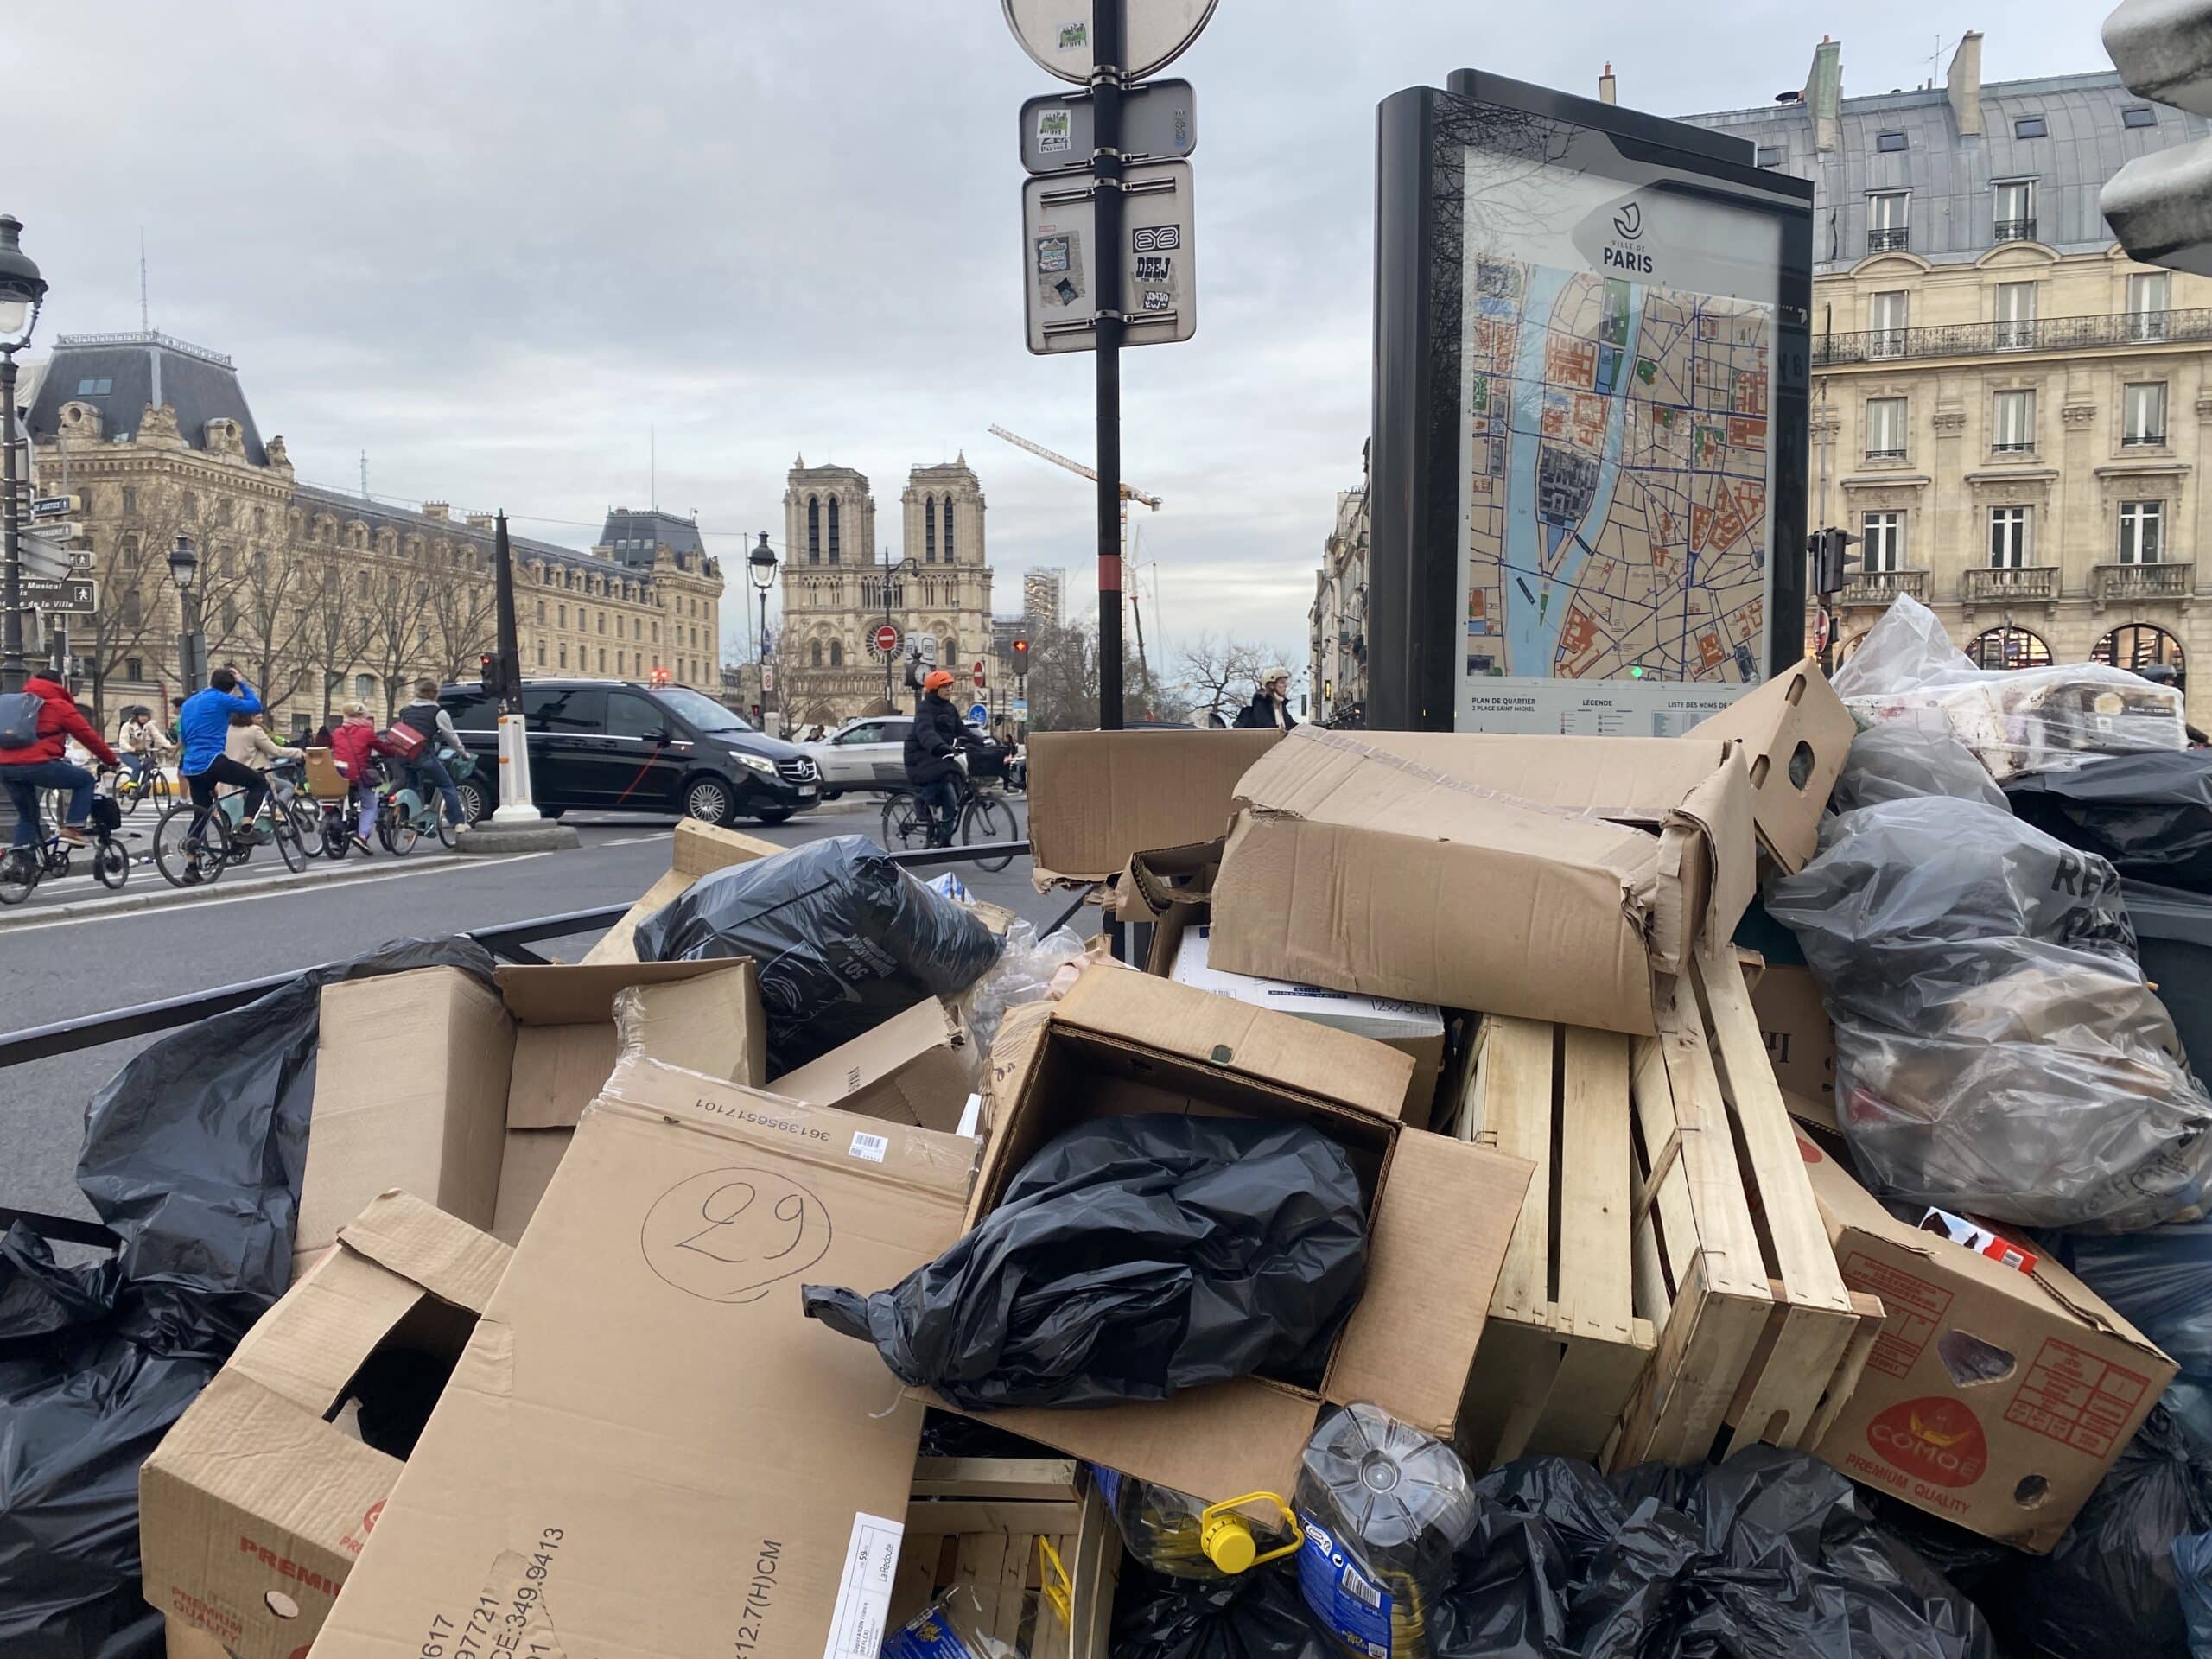 Trash meters away from the Notre Dame in Paris